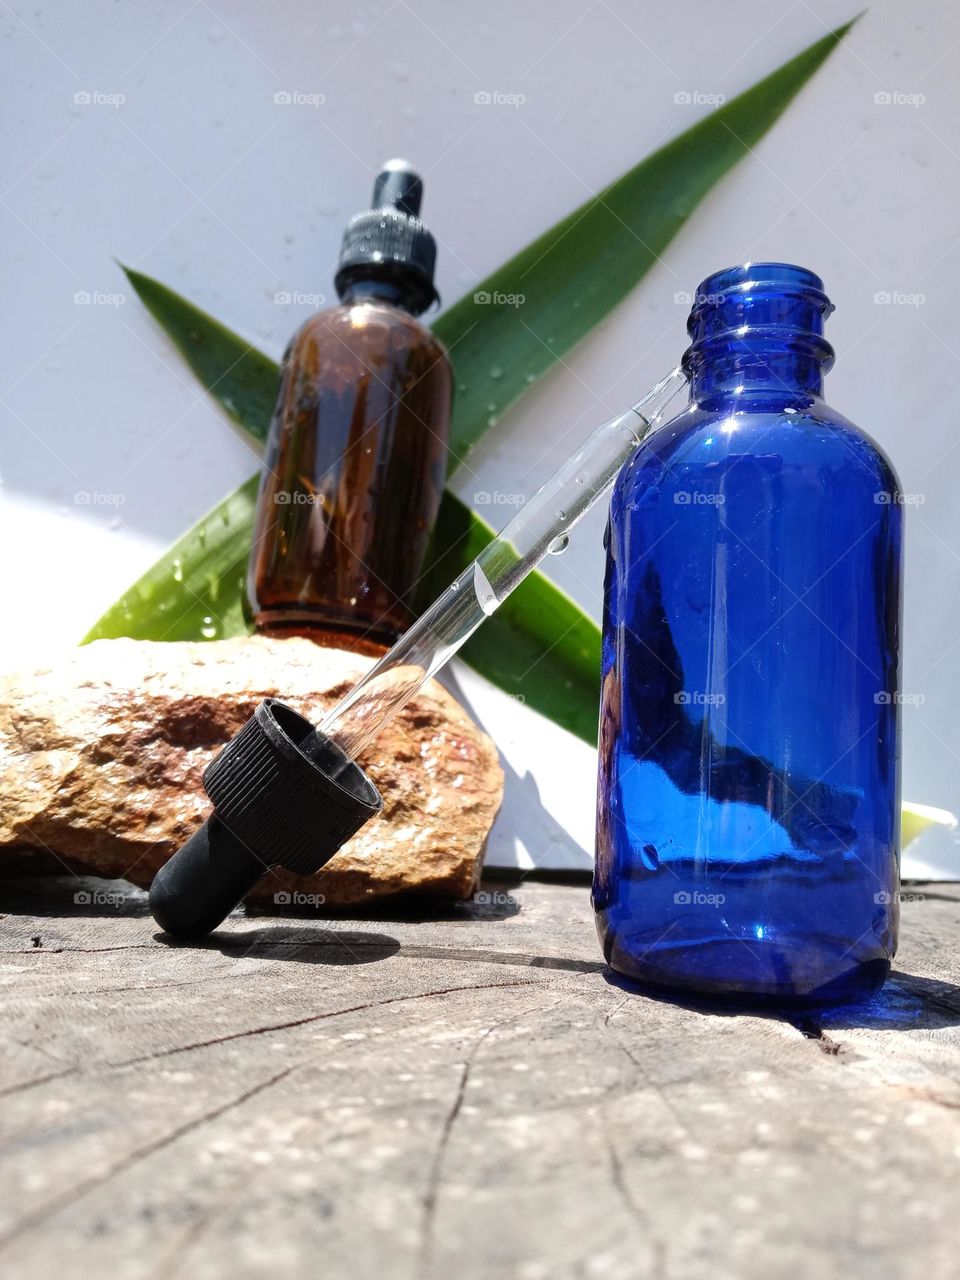 blue and amber glass dropper bottle. In nature. tree trunk.